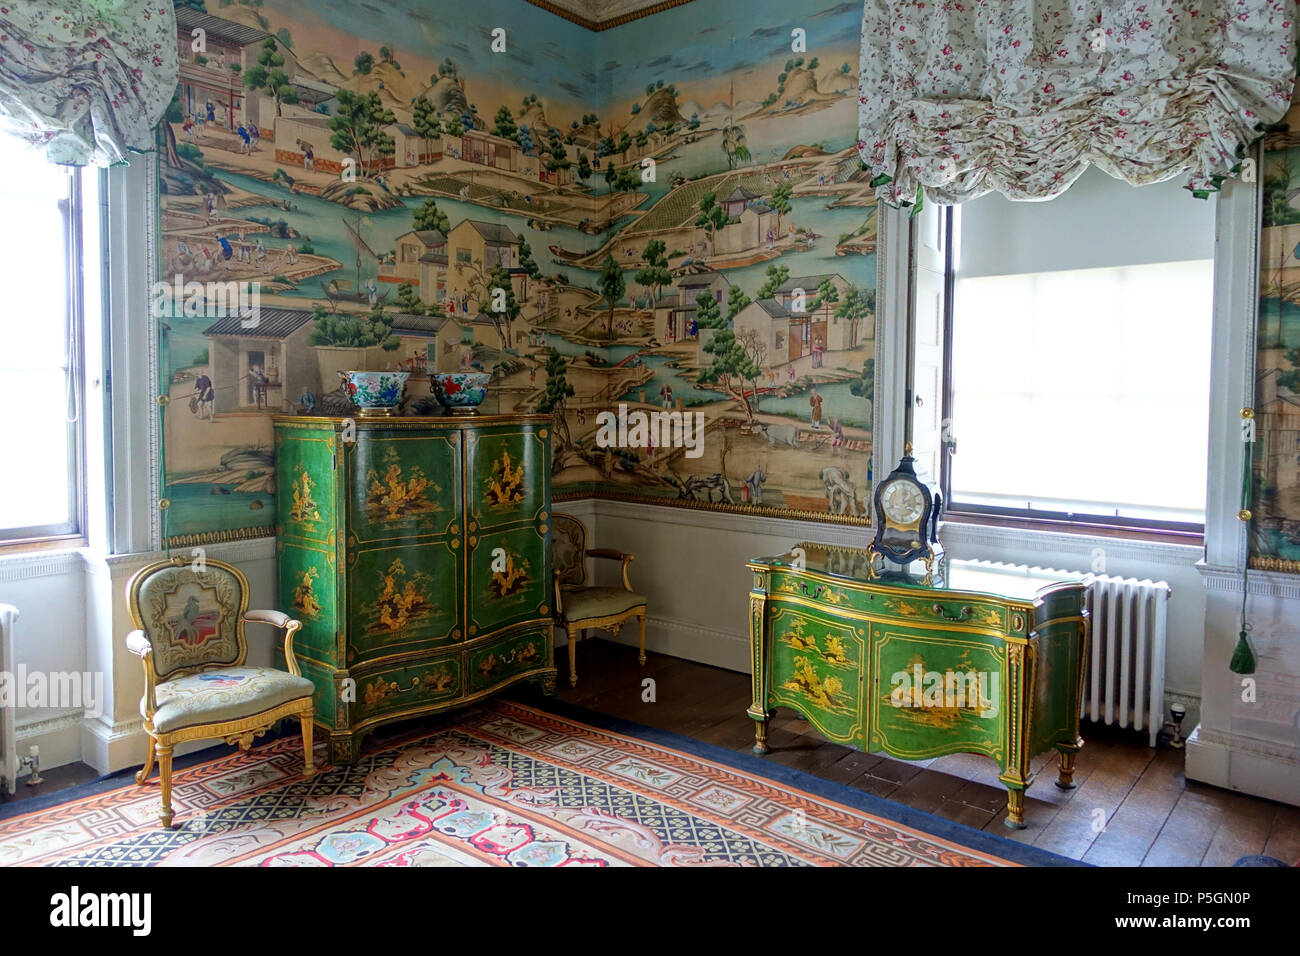 N/A. English: Interior view of Harewood House - West Yorkshire, England. Chinoiserie furniture by Thomas Chippendale. 16 June 2016, 07:08:03. Daderot 491 East Bedroom - Harewood House - West Yorkshire, England - DSC01727 Stock Photo